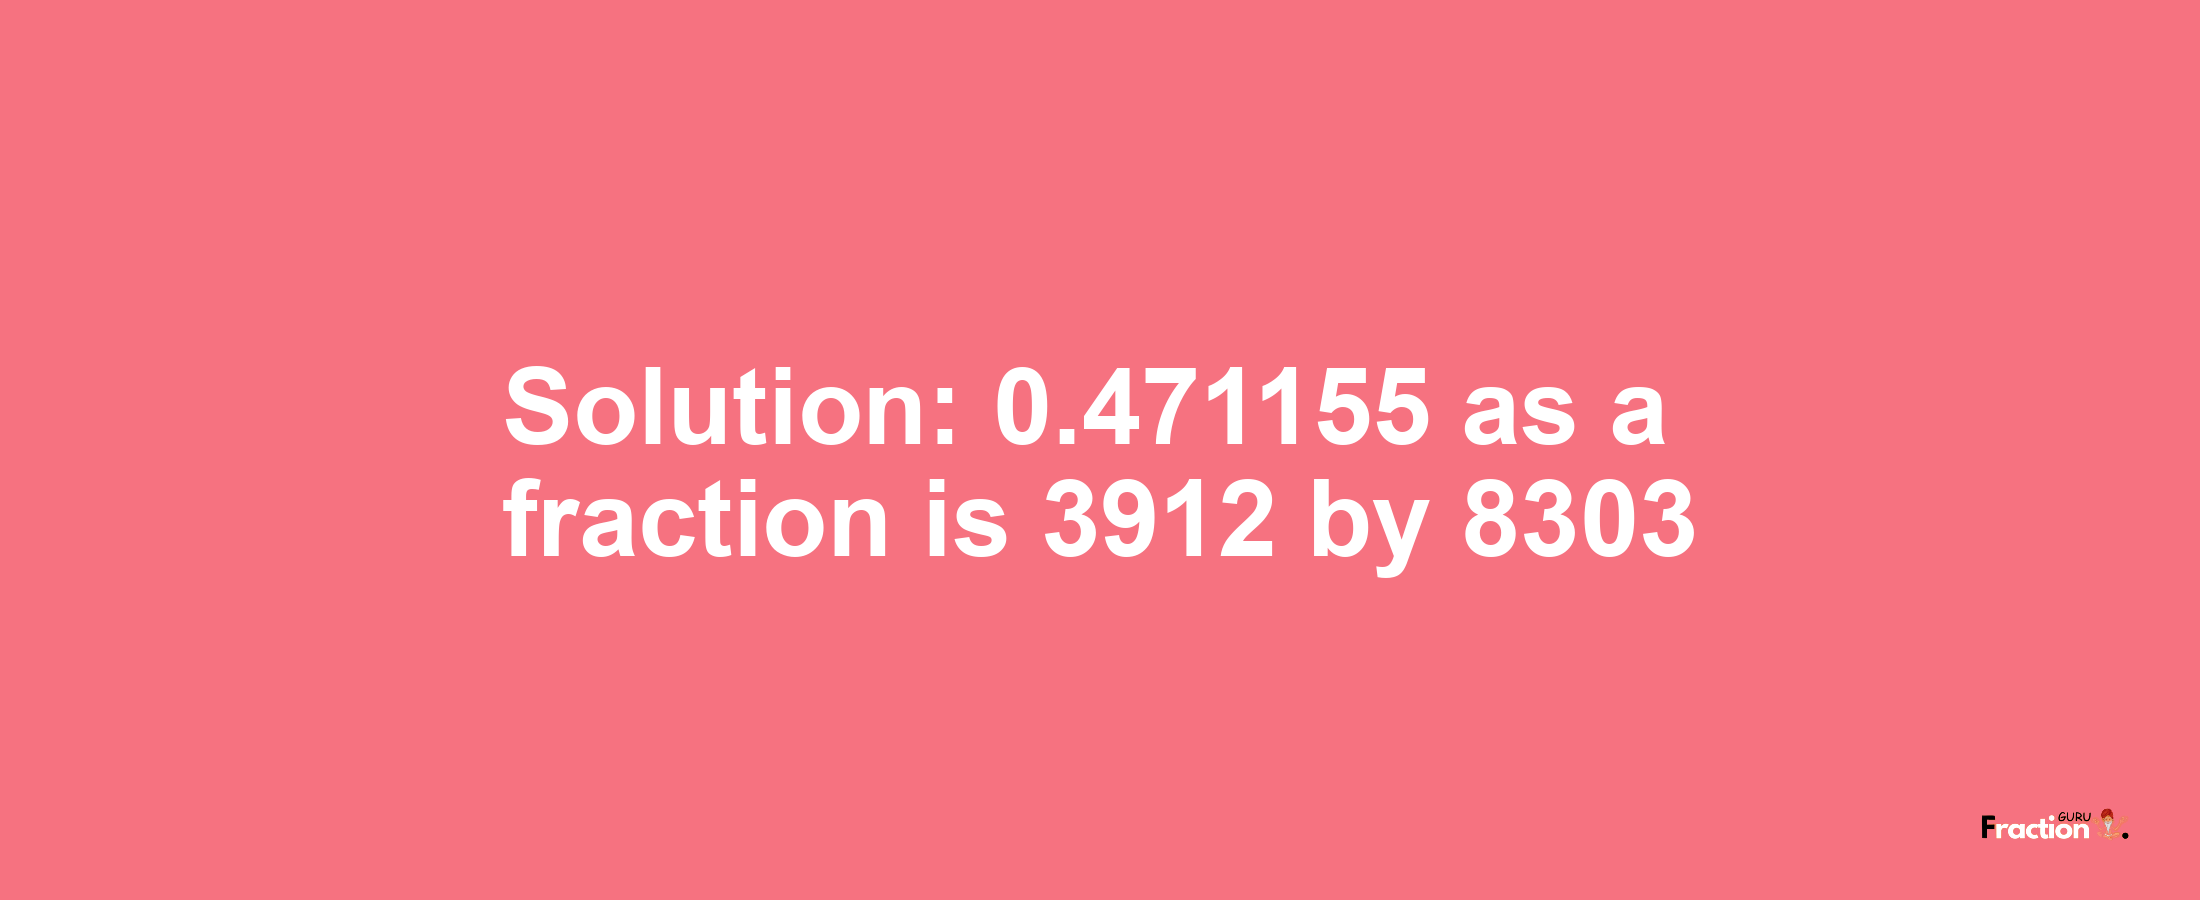 Solution:0.471155 as a fraction is 3912/8303